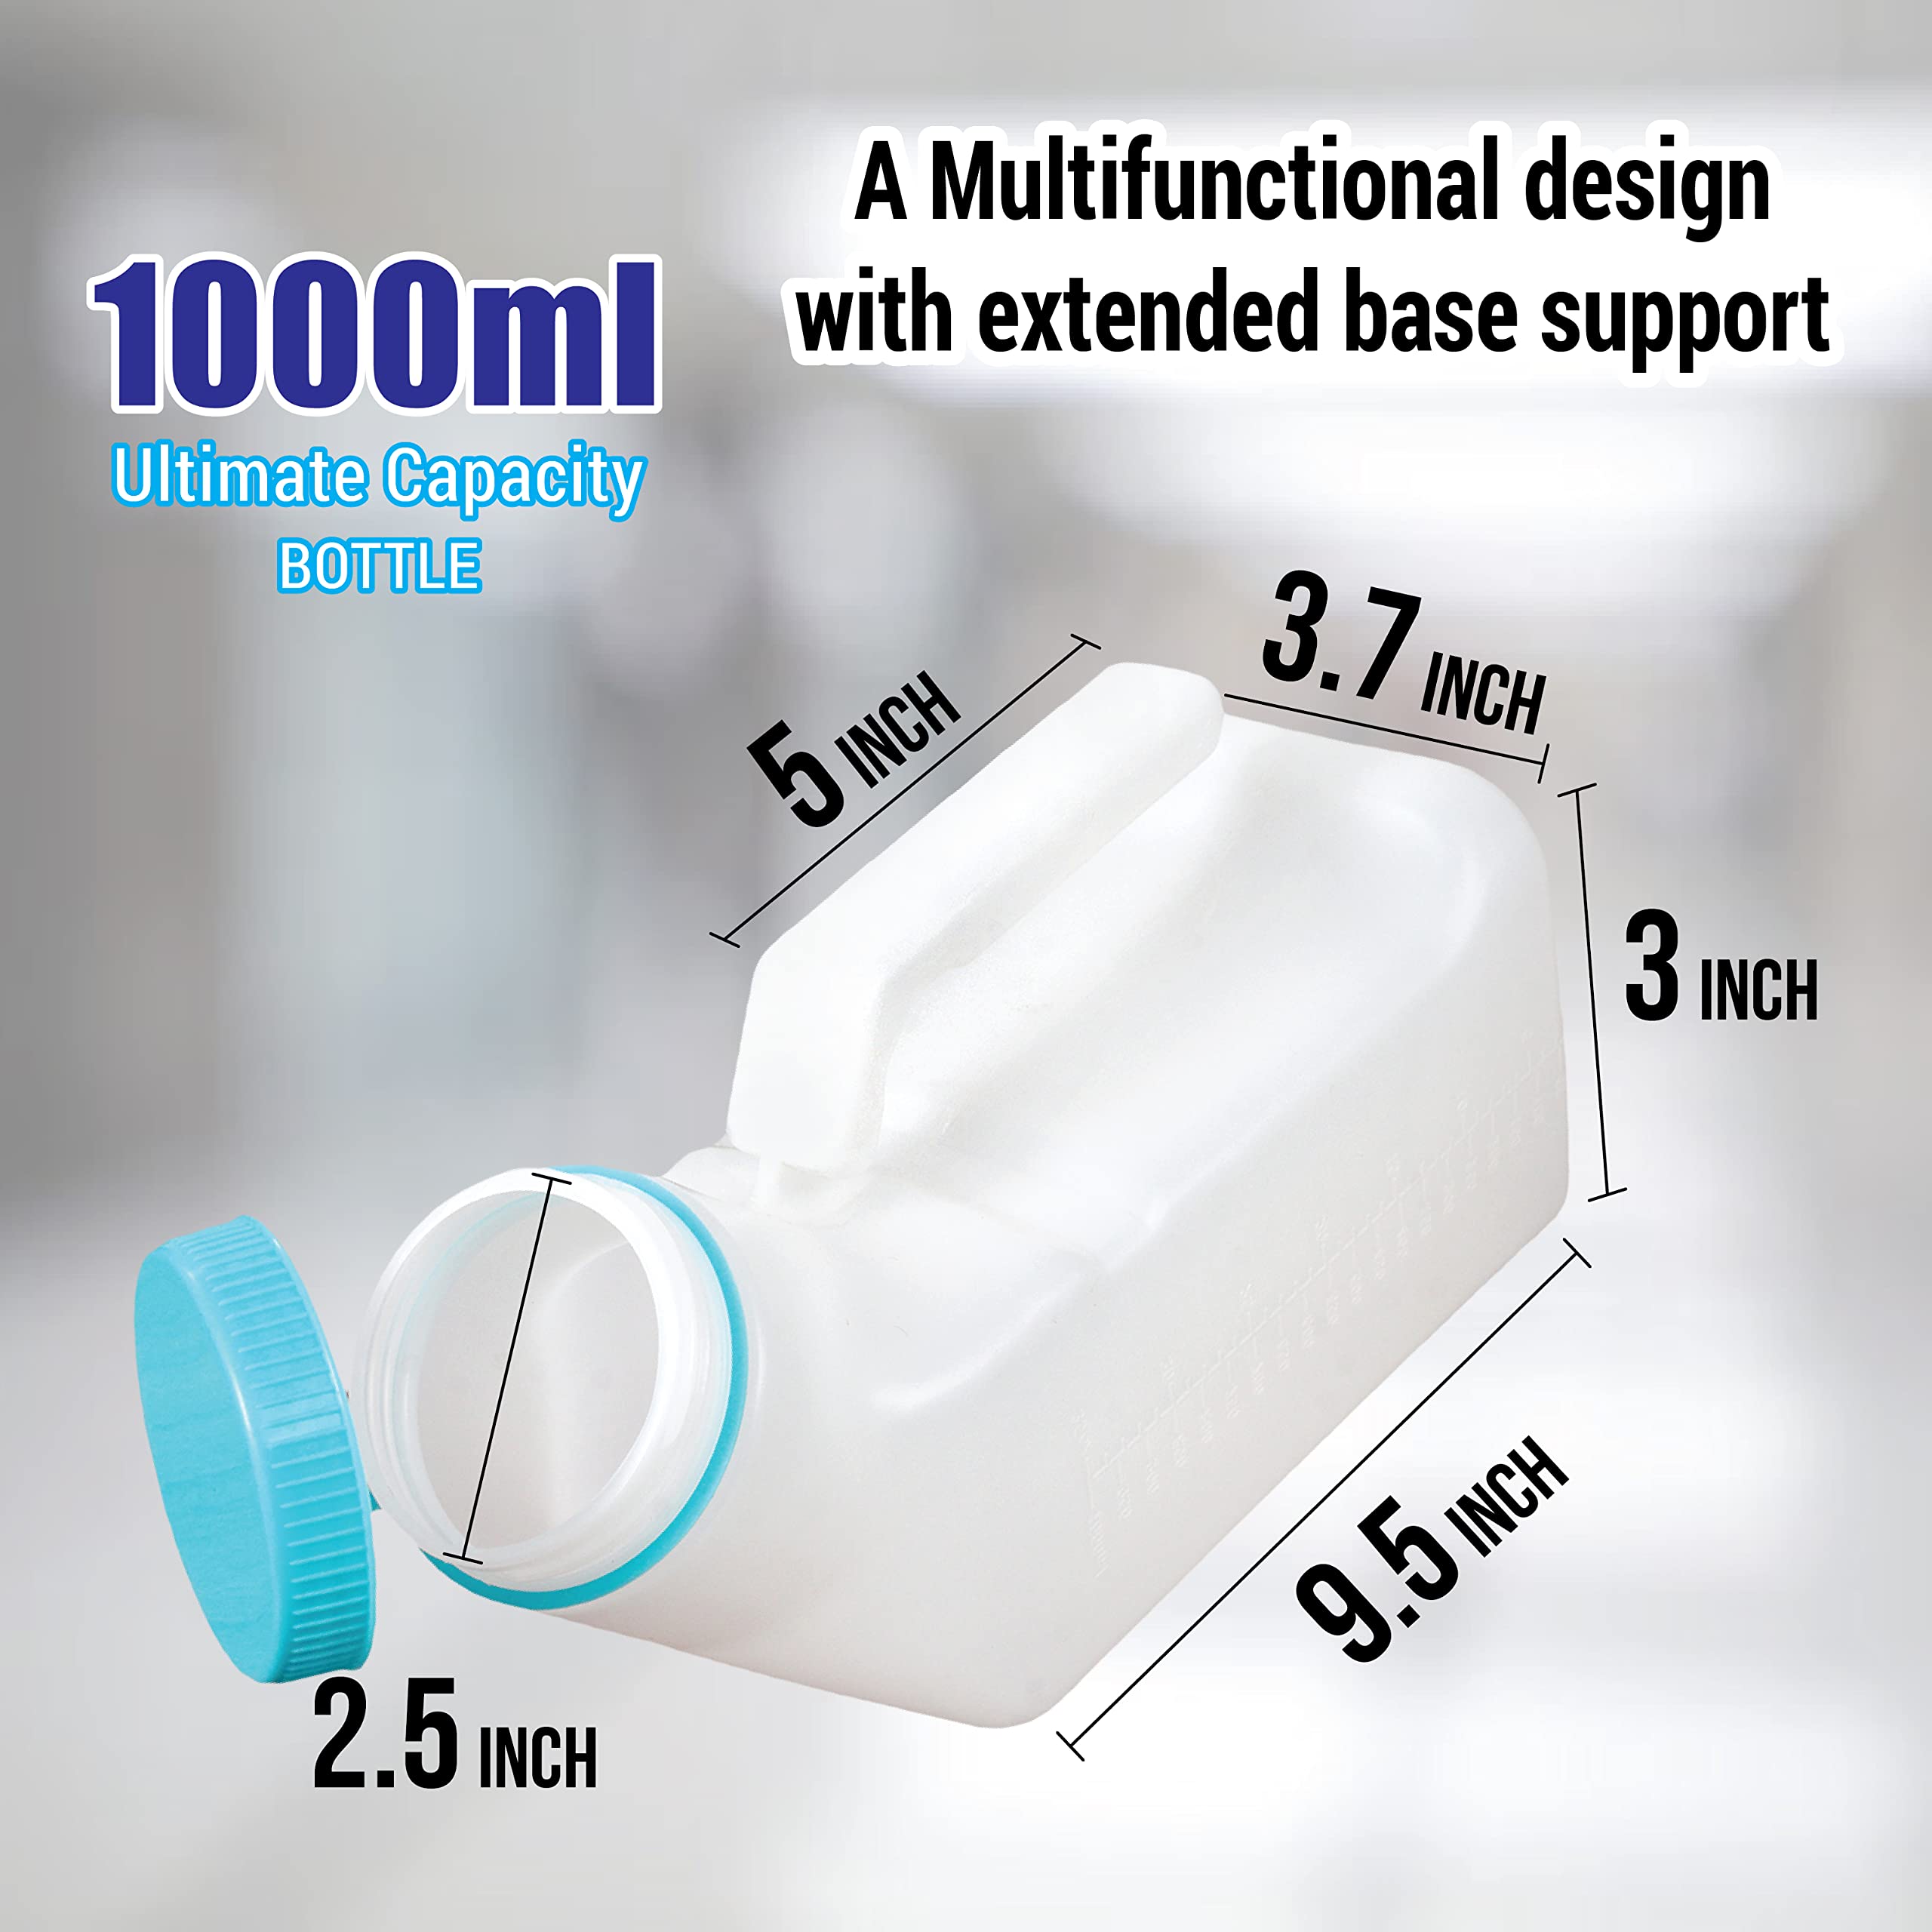 Portable Urinals for Men and Elderly 1000ml Urine Jar Spill Proof, Plastic, Urinal Bottle for Men Glow in The Dark Screw Cap - for Urine Collection and Travel Pee Bottle (1 Count (Pack of 1)